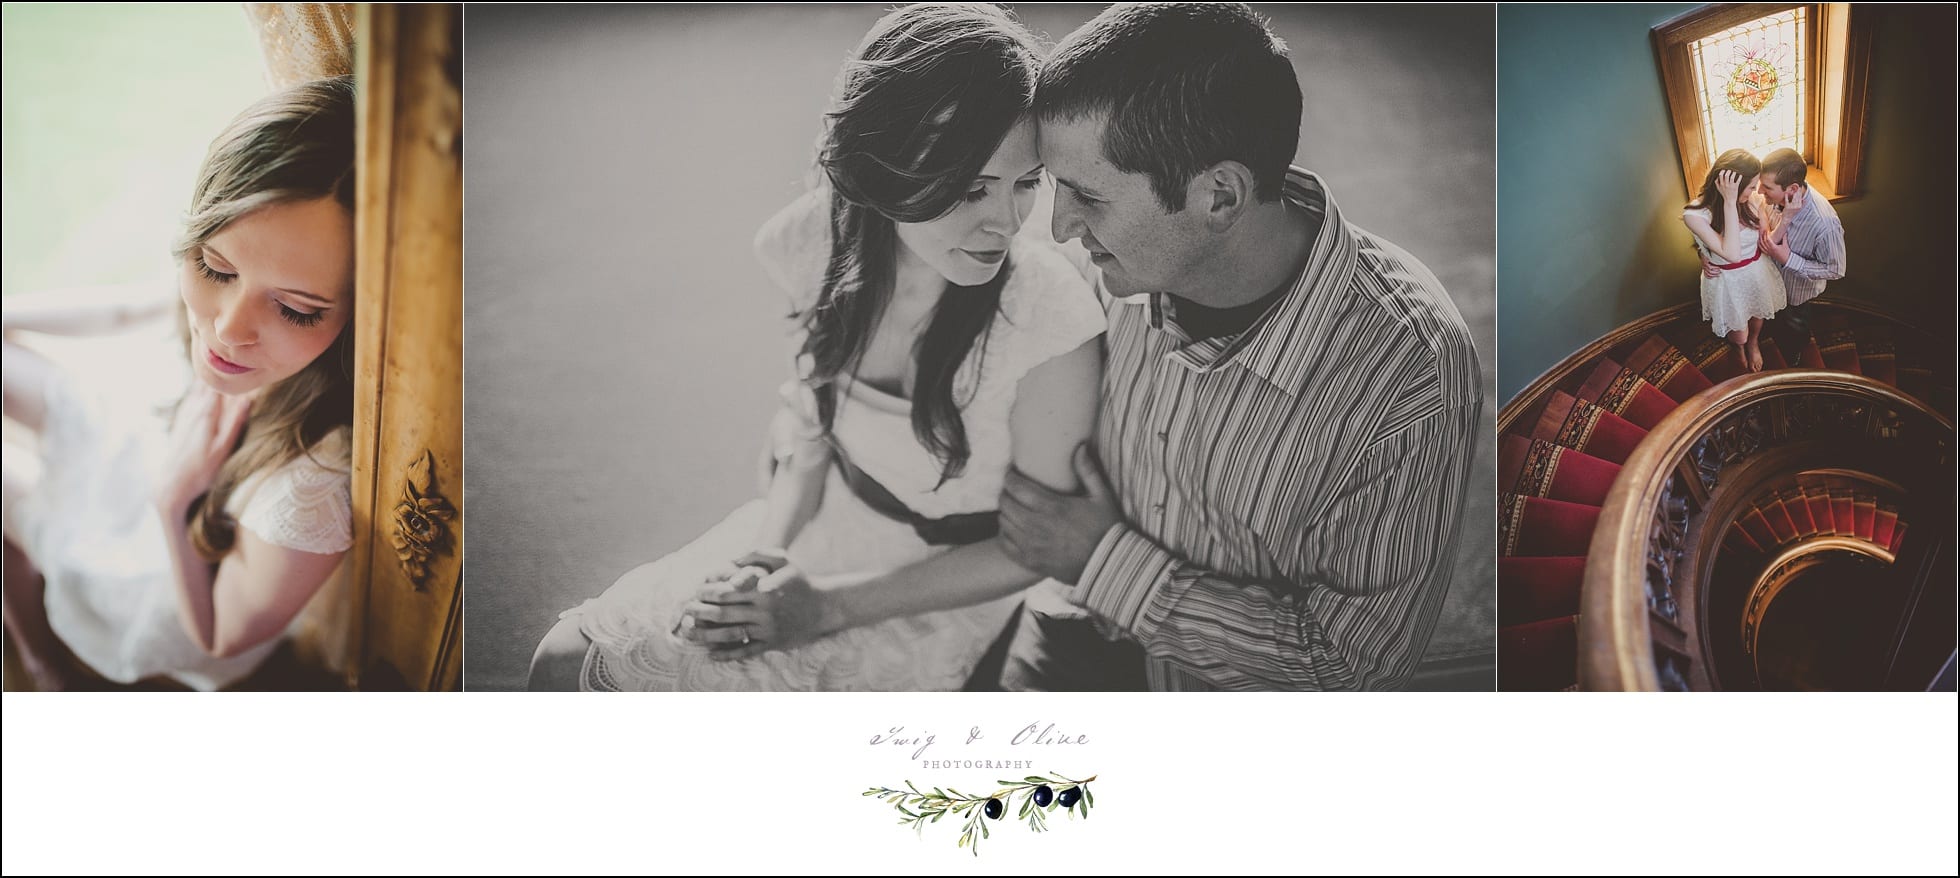 black and white engagement sessions, Fort Wayne IN to Sun Prairie WI or bust, elegant couples